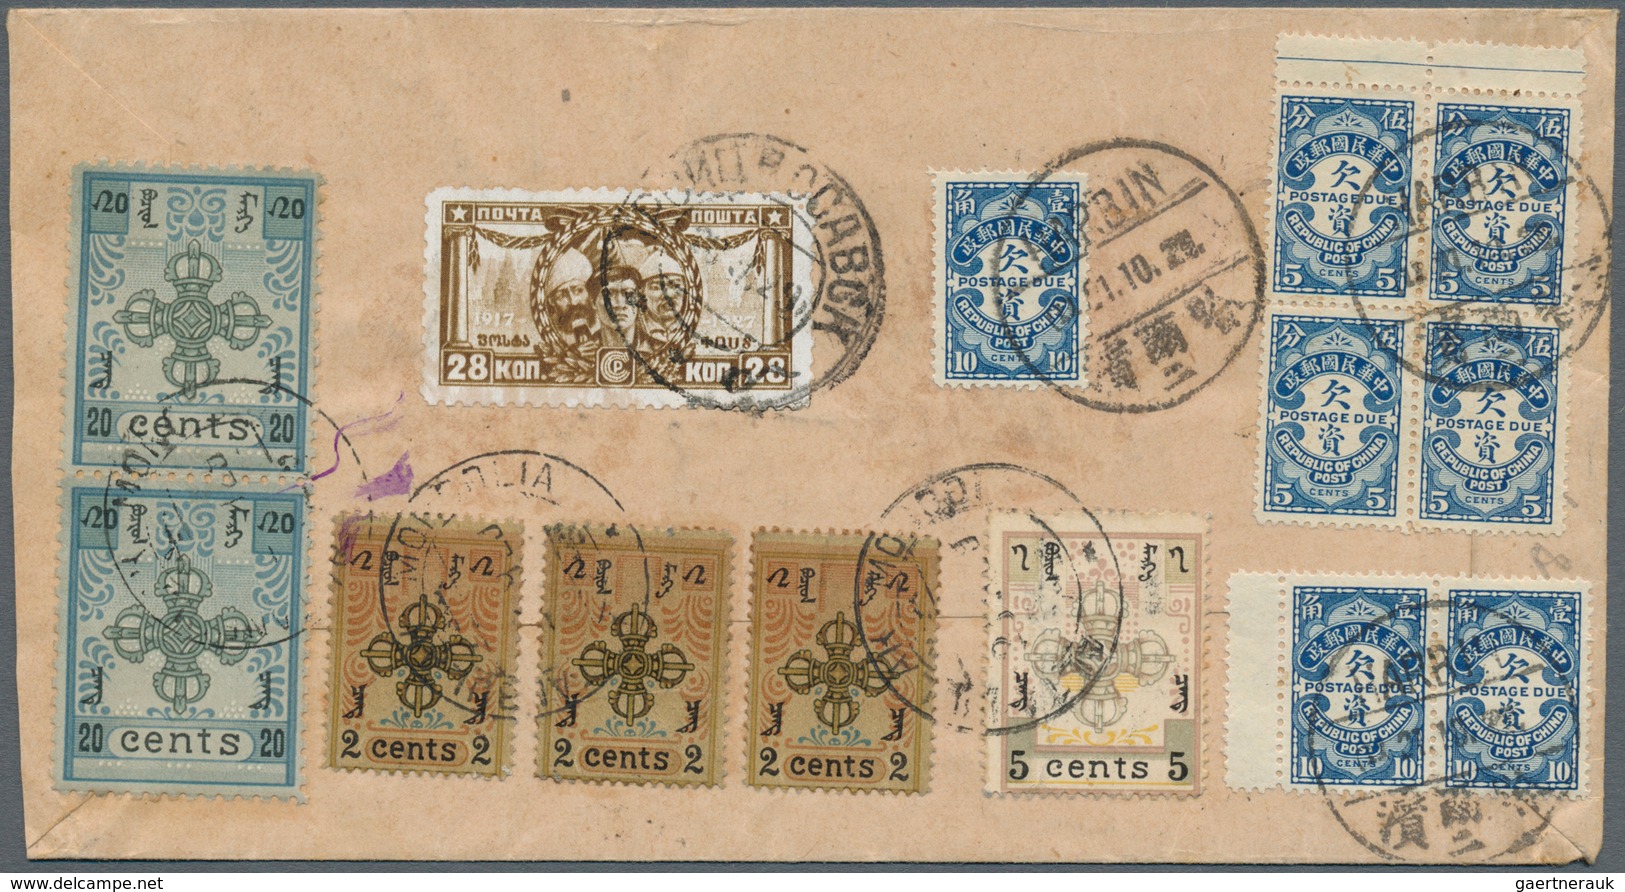 00386 Mongolei: 1929 Registered Cover With Russian/Mongolian/Chinese Mixed Franking From A Russian P.O. To - Mongolia